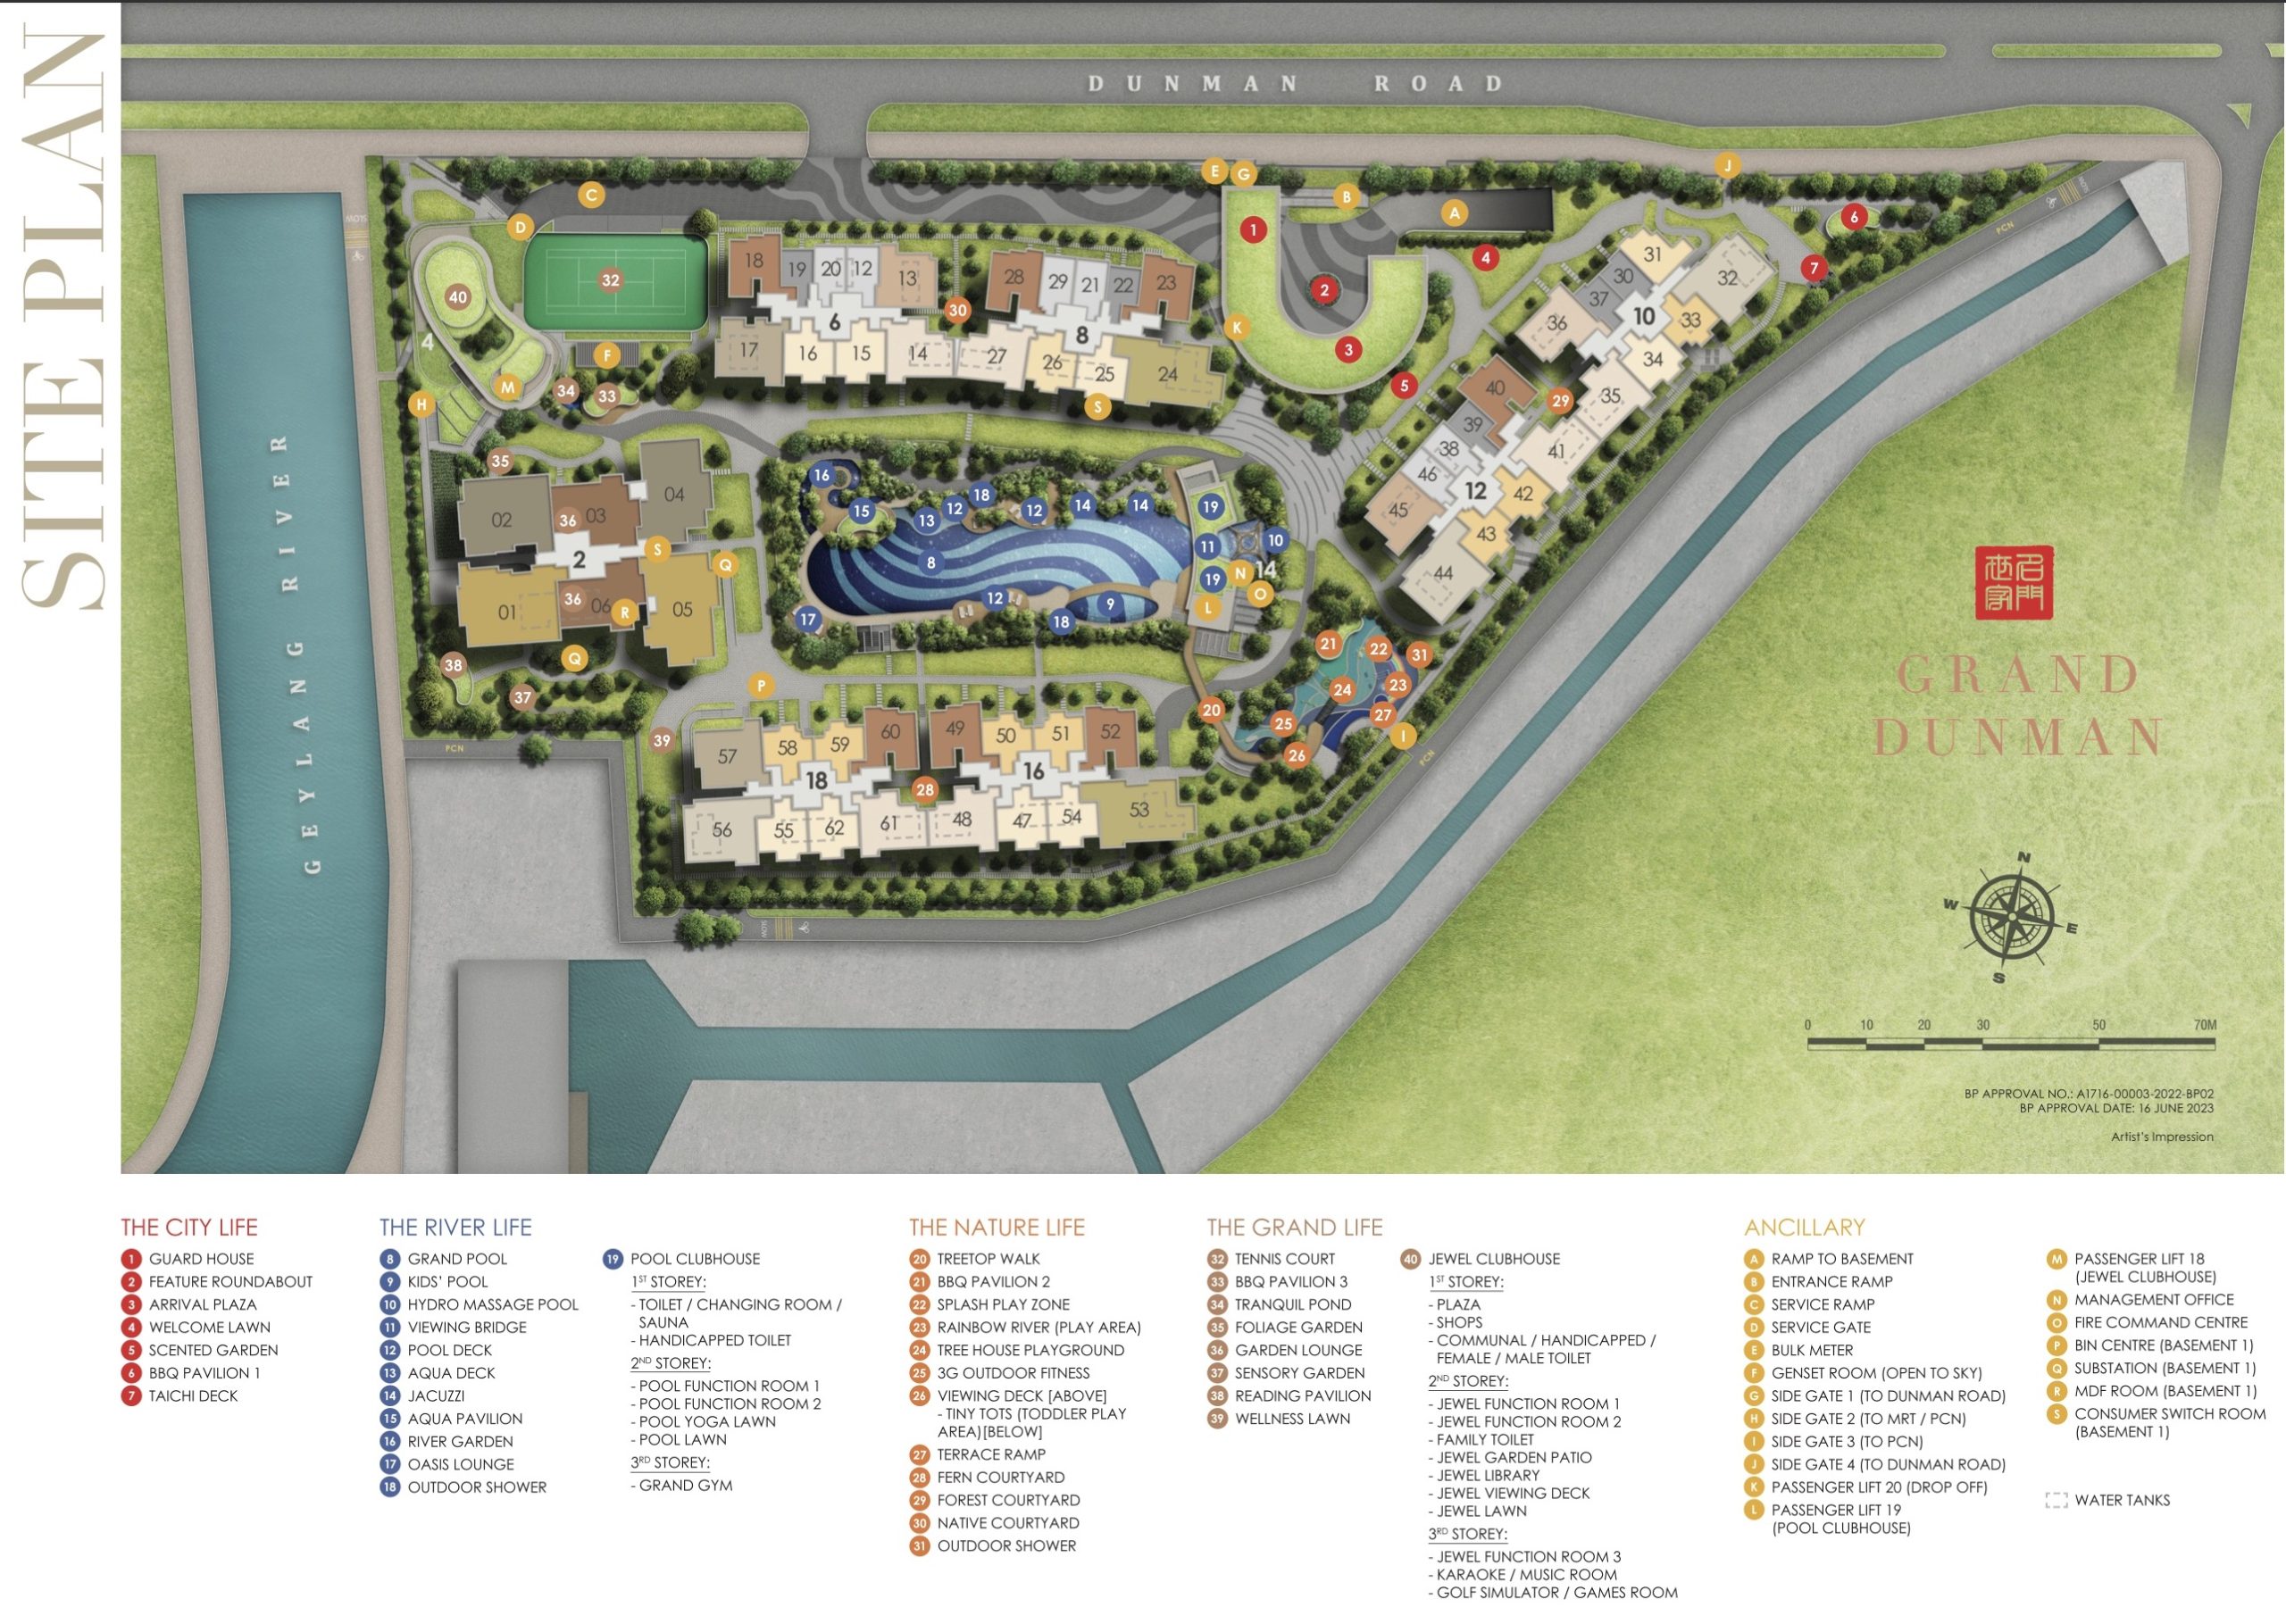 Grand-Dunman-condo-site-plan-and-facilities-scaled